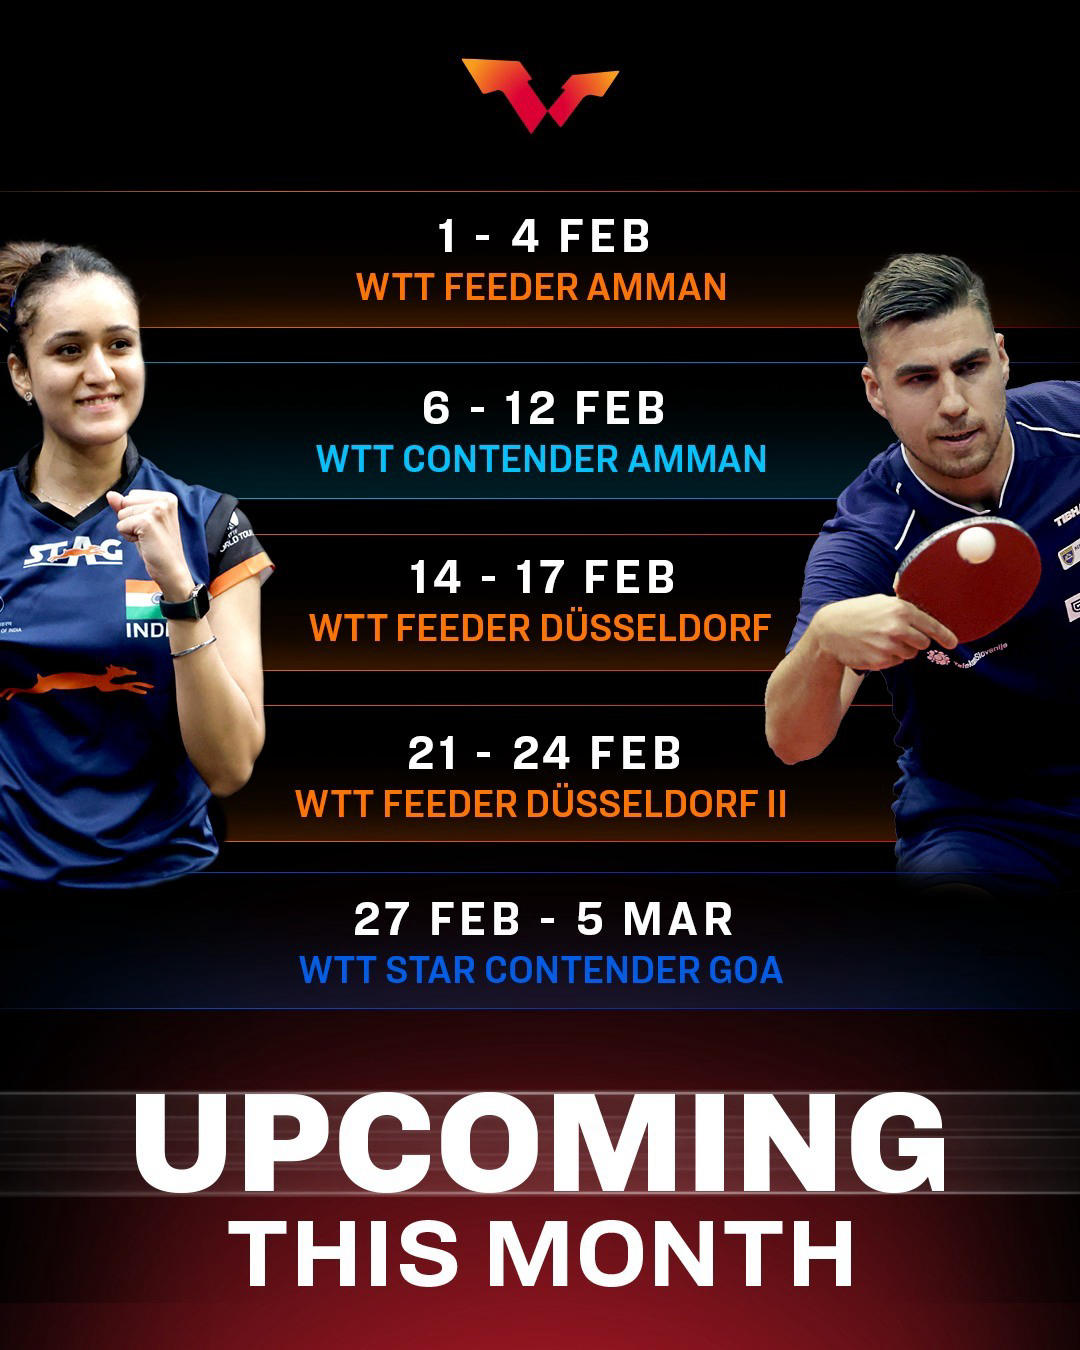 It's going to be a Fab February with these exciting upcoming events